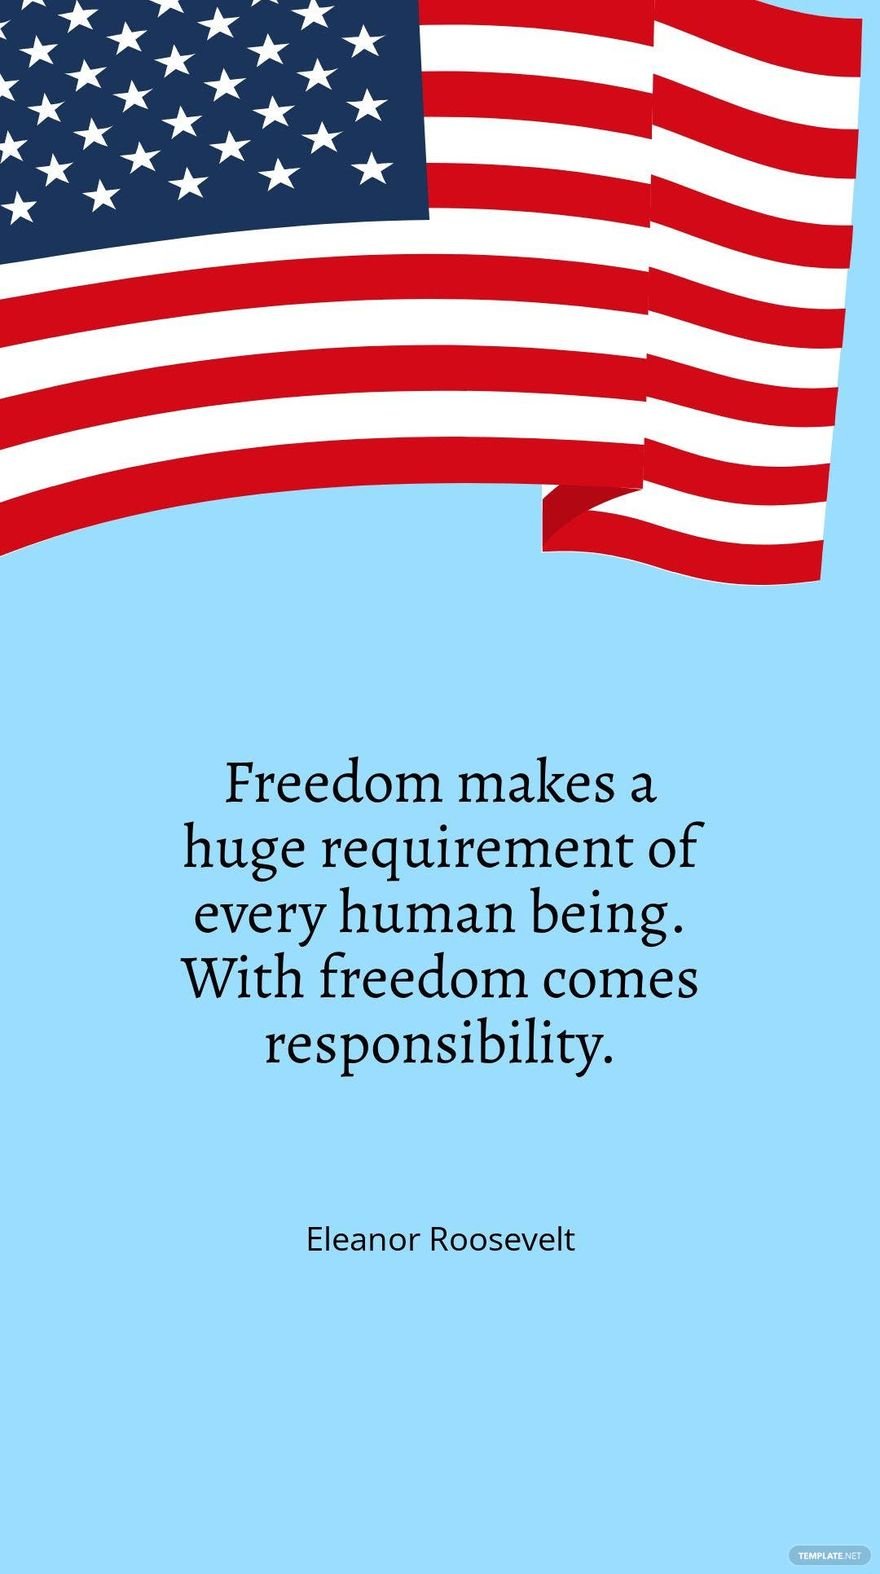 Eleanor Roosevelt - Freedom makes a huge requirement of every human being. With freedom comes responsibility.